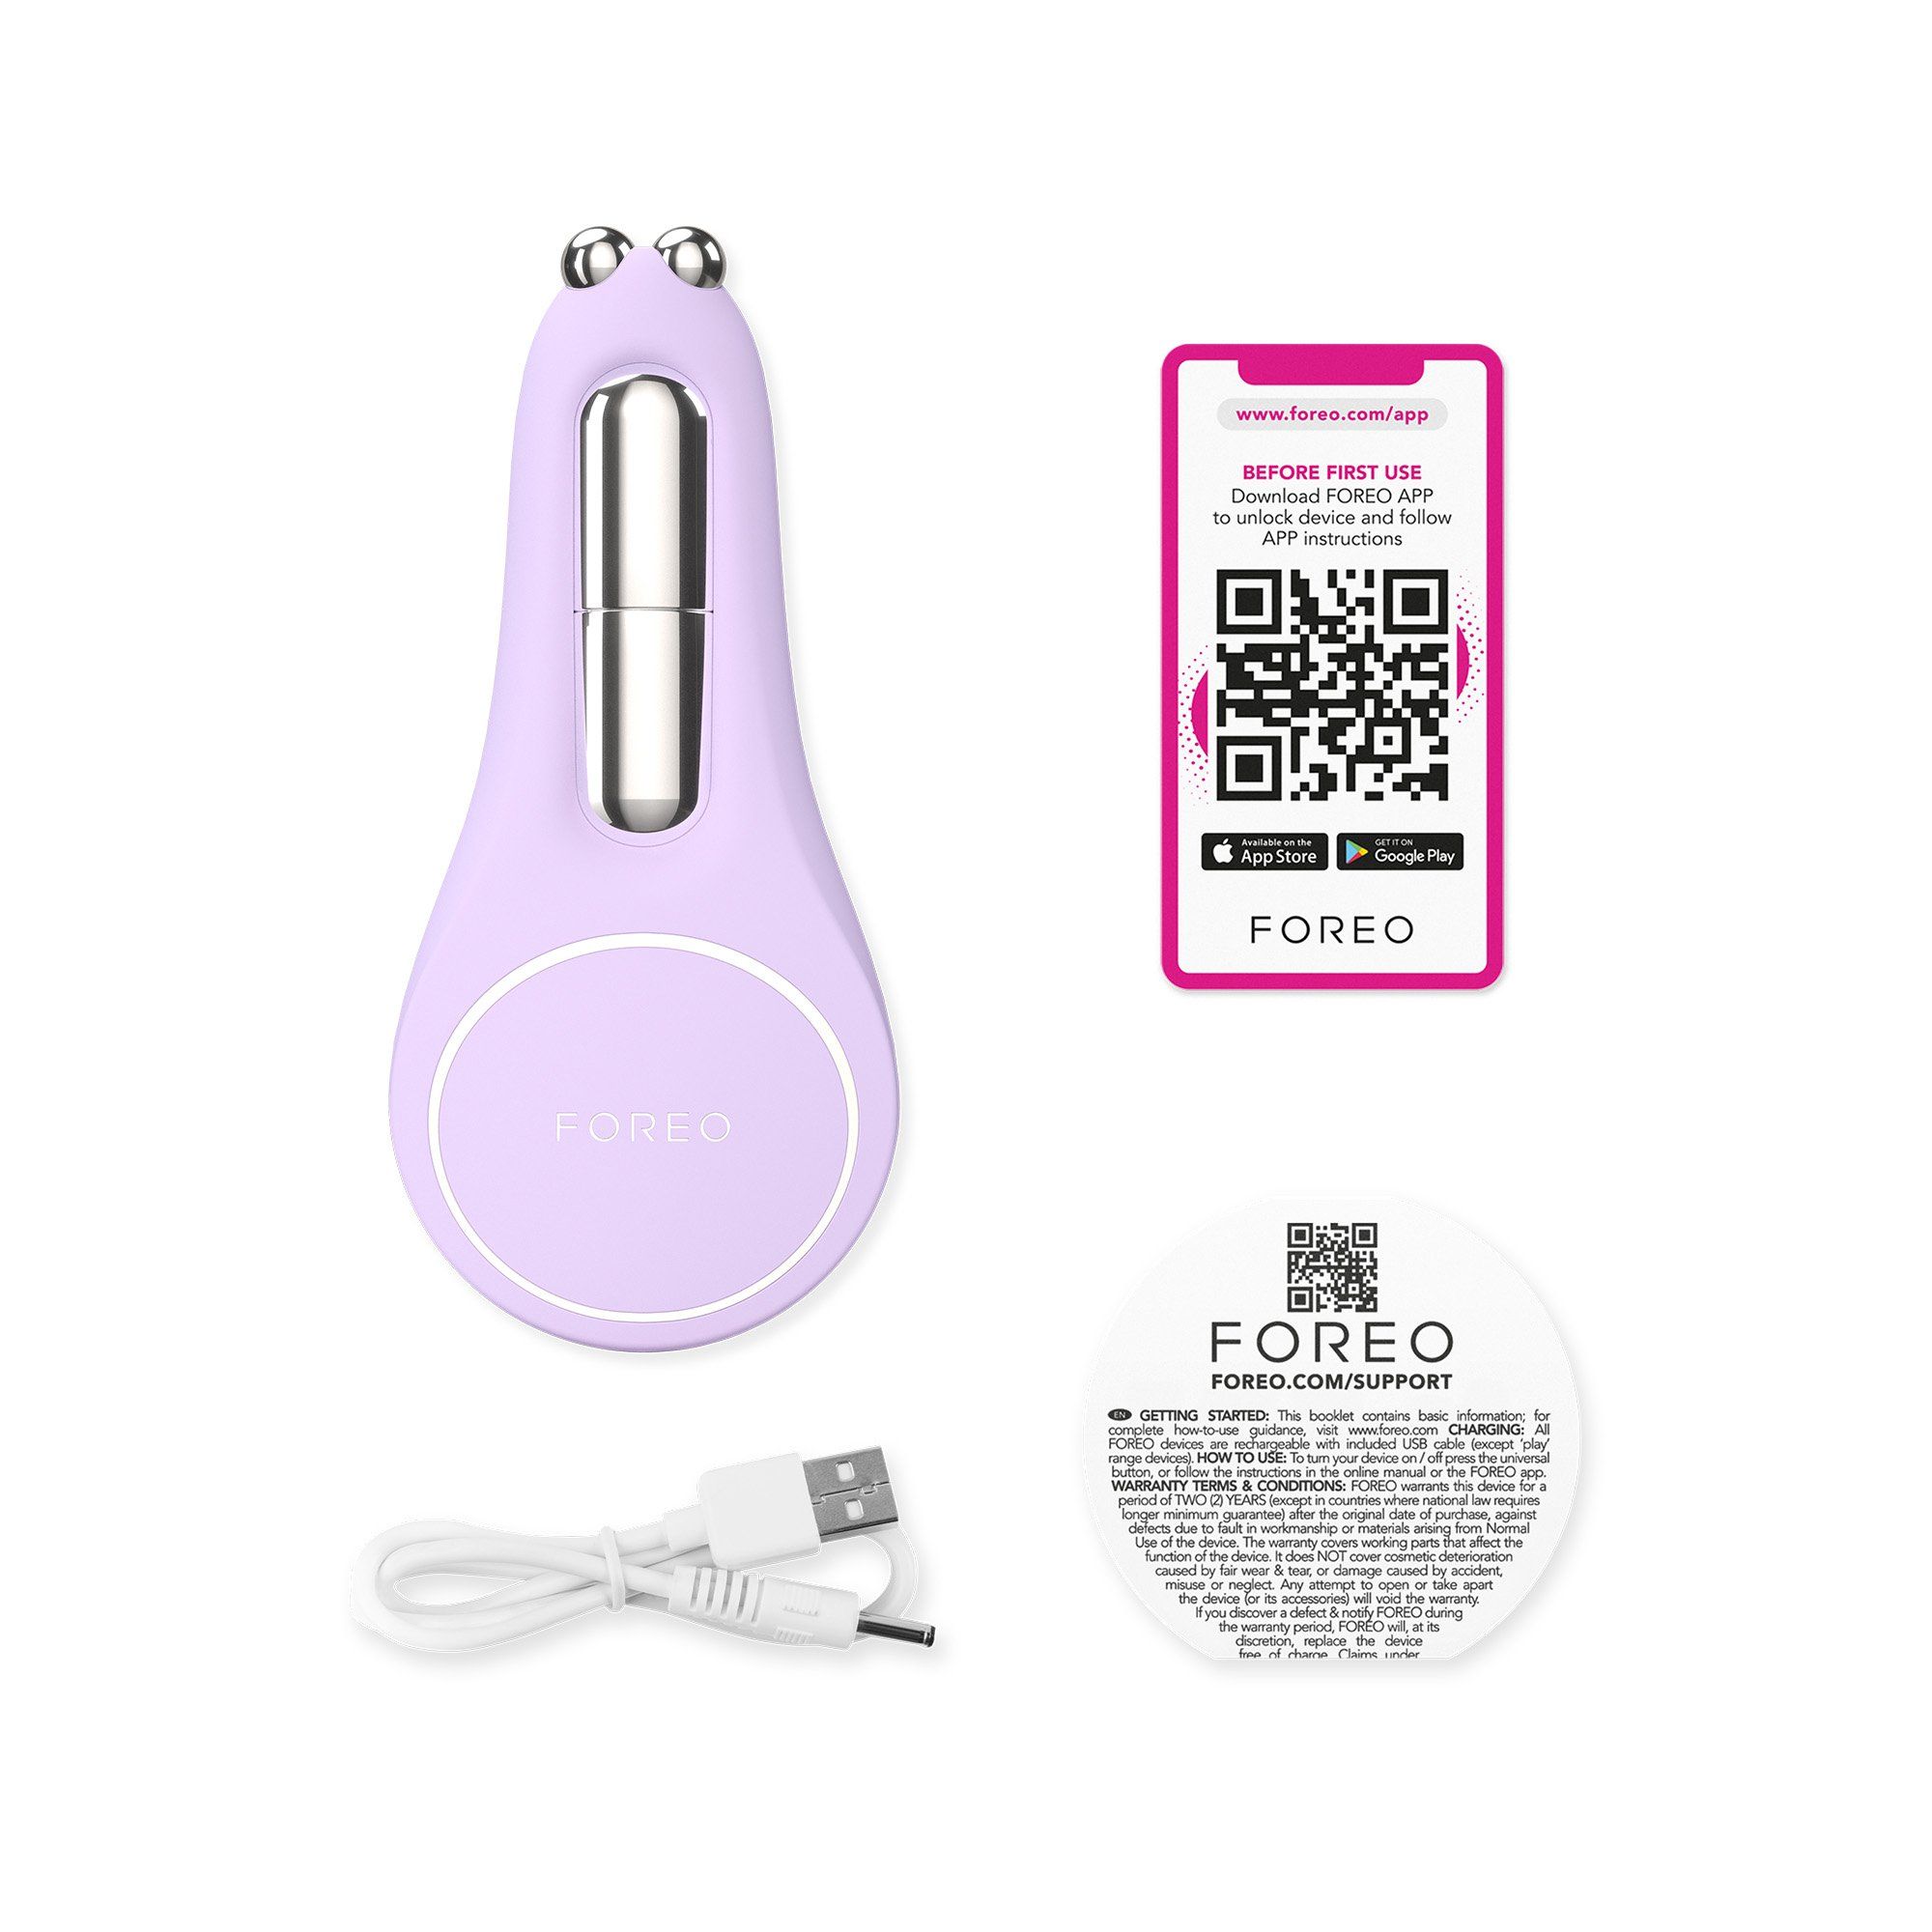 FOREO BEAR™ 2 Eyes & Lips Microcurrent Line Smoothing Device - Lavender